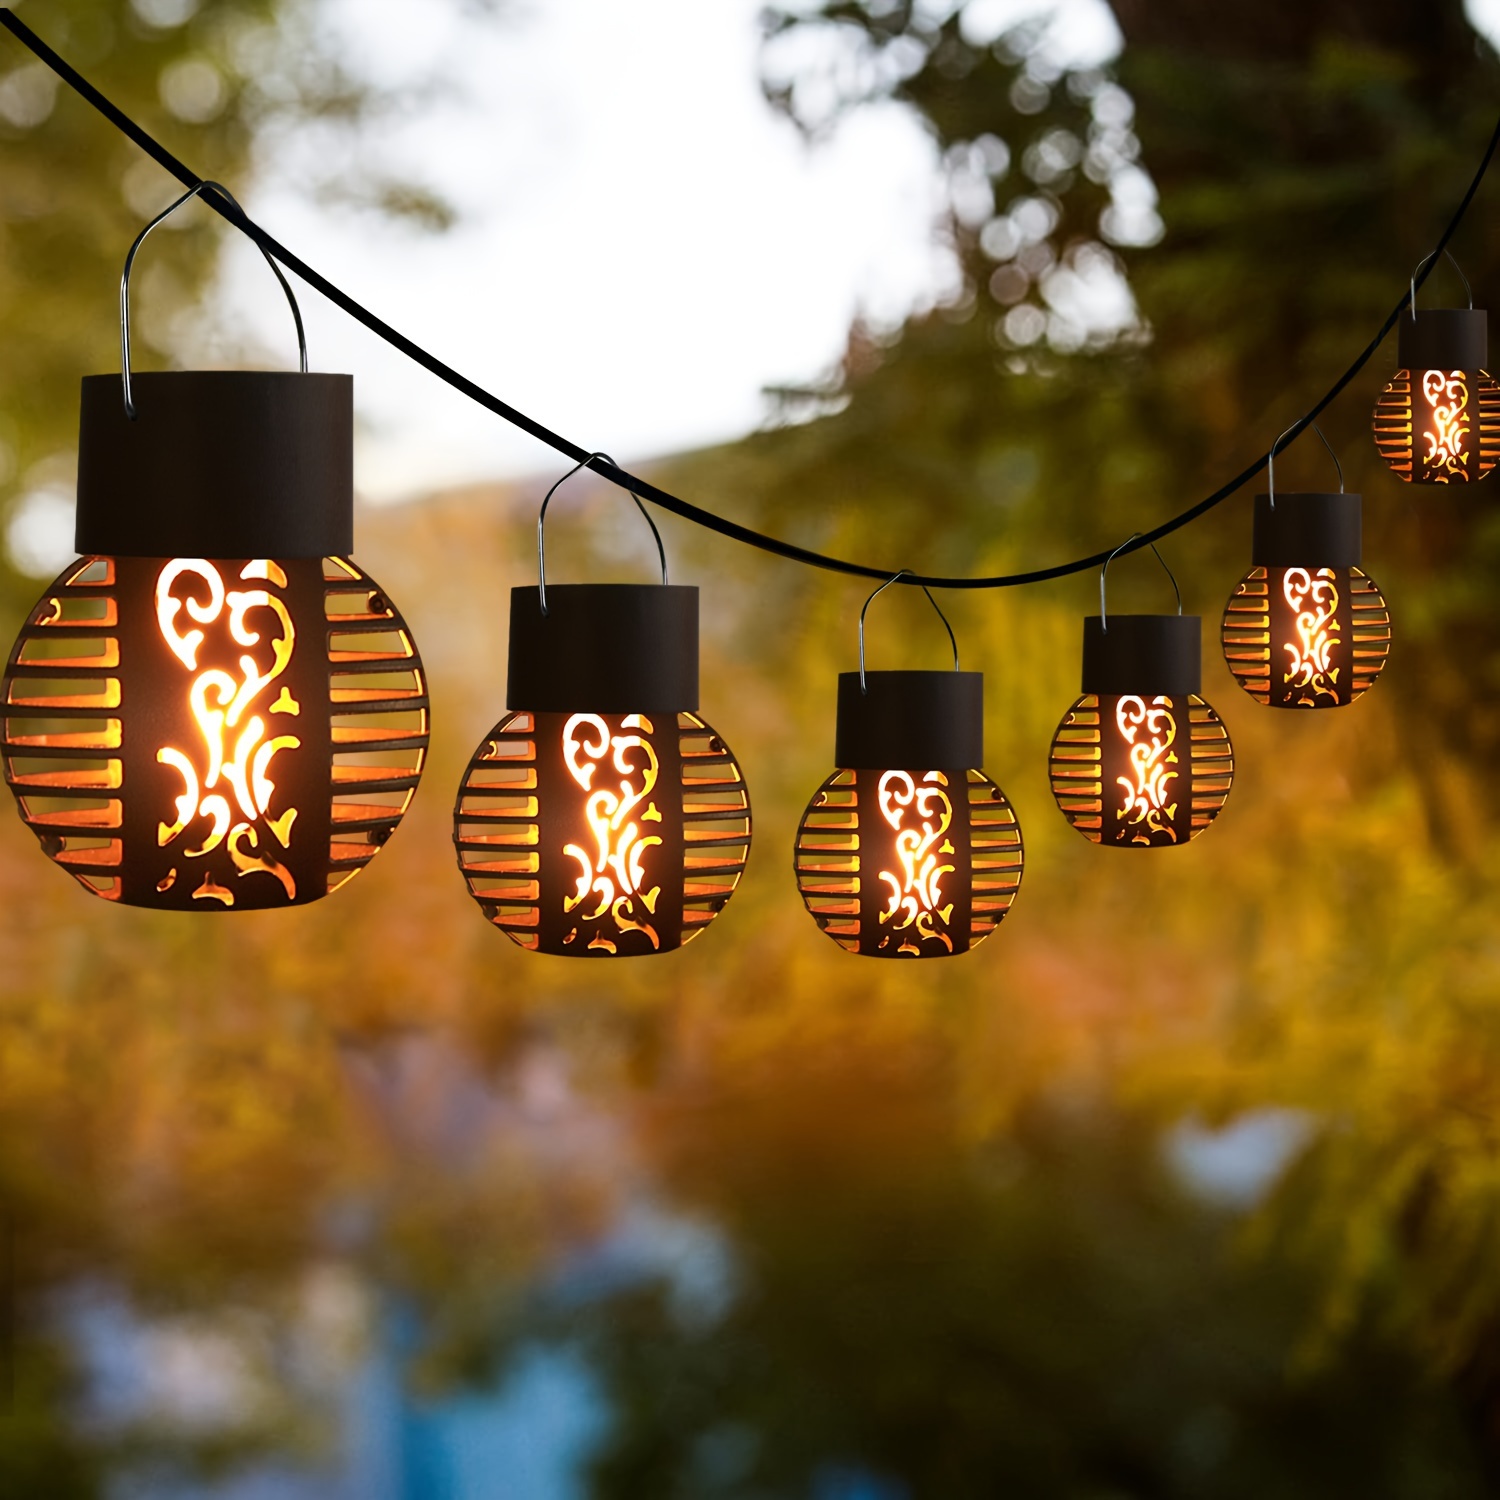 

no-wire" 6-led Solar Flame Lanterns - Waterproof Outdoor Hanging Lights With Flickering Fire Effect, Perfect For Garden, Lawn, Patio & Pathway Decor